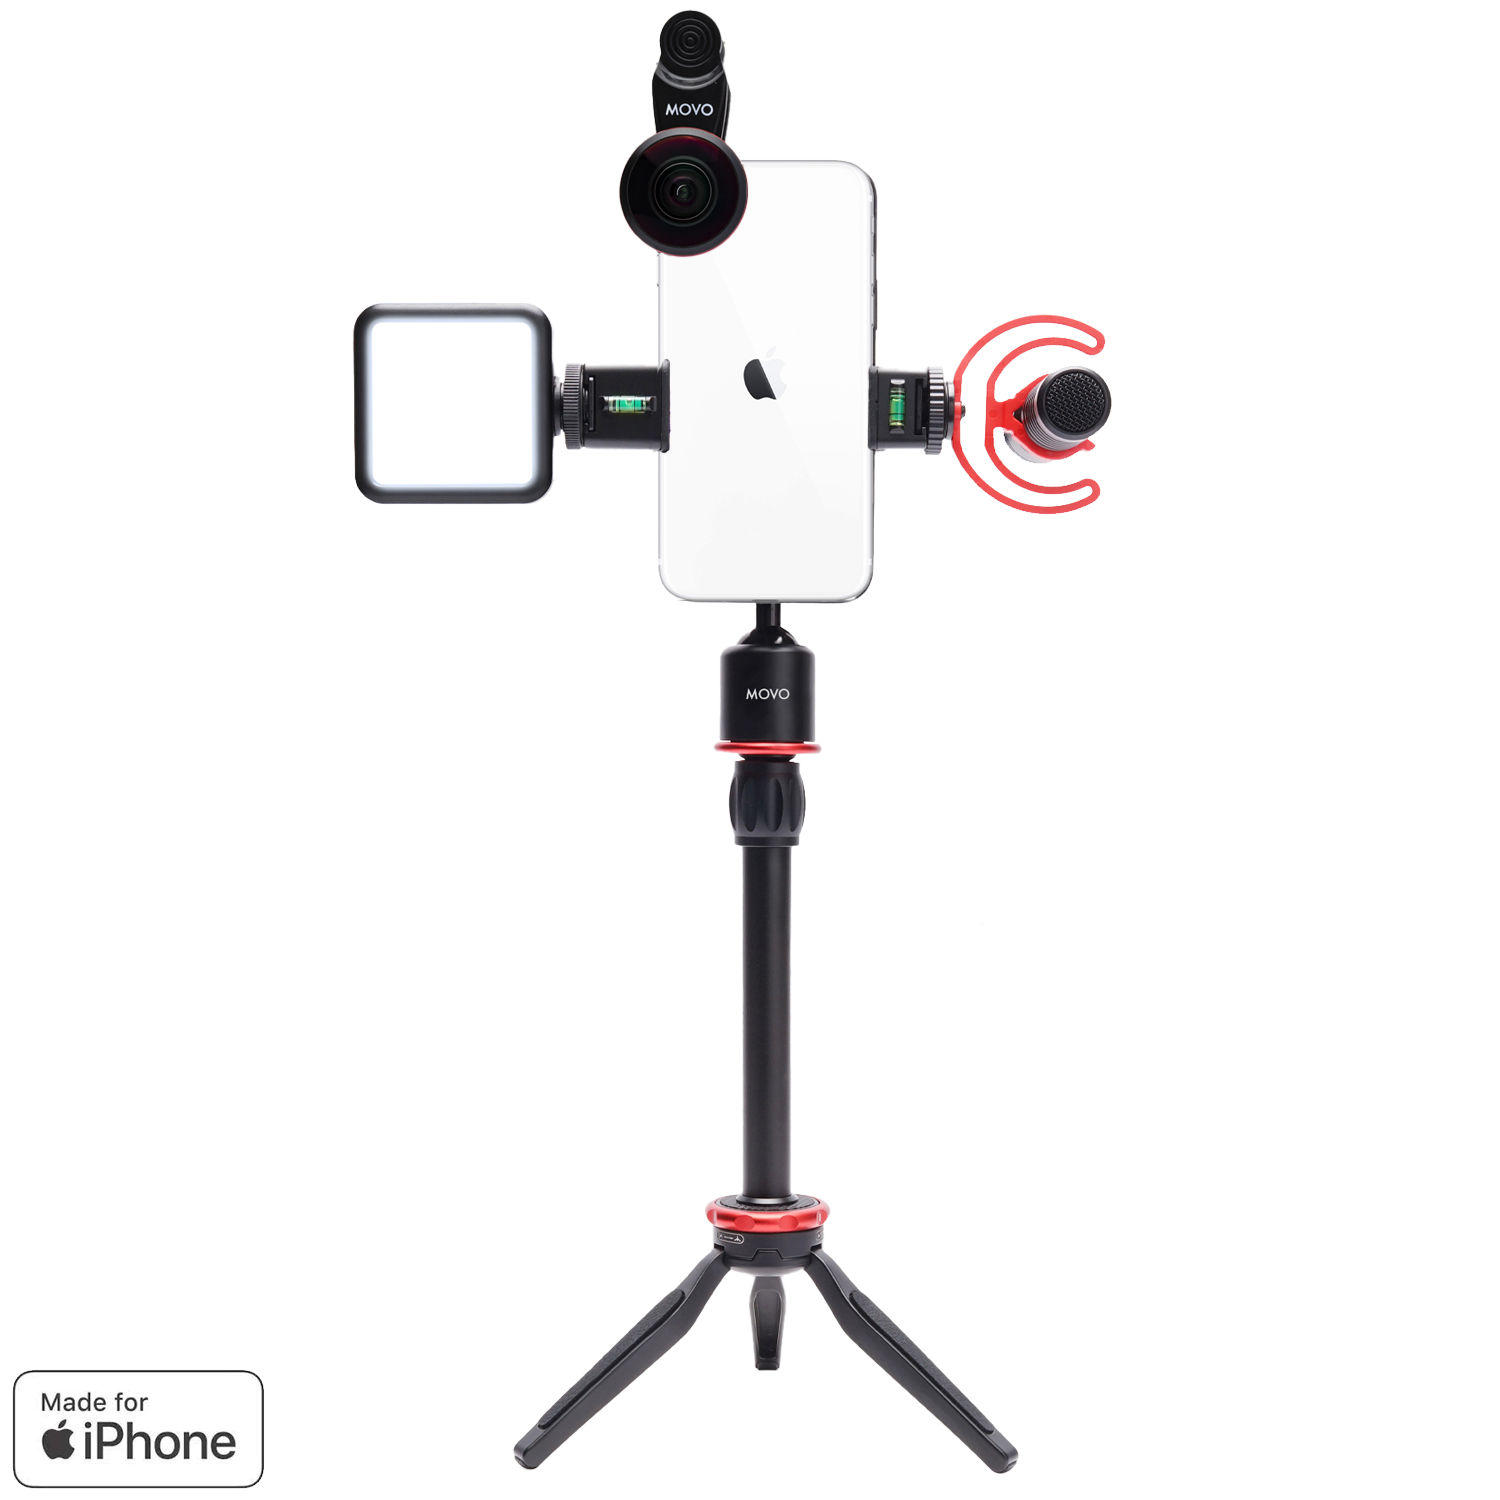 iVlog1 | Vlogging Kit for iPhone w/ Tripod & More | Movo